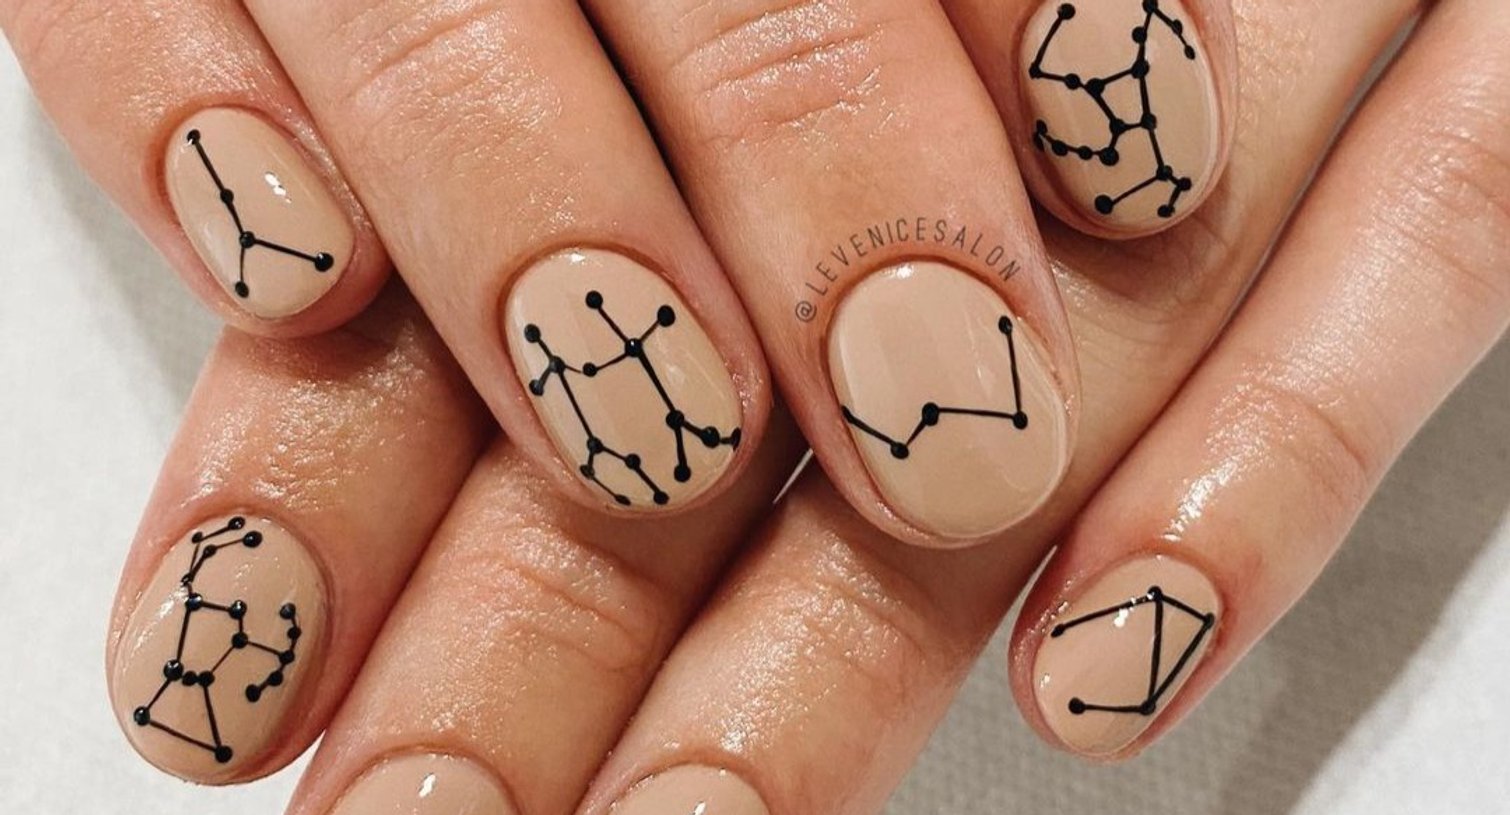 DIY Nail Art: Easy, Glamorous and Step-by-Step Guide to Homemade